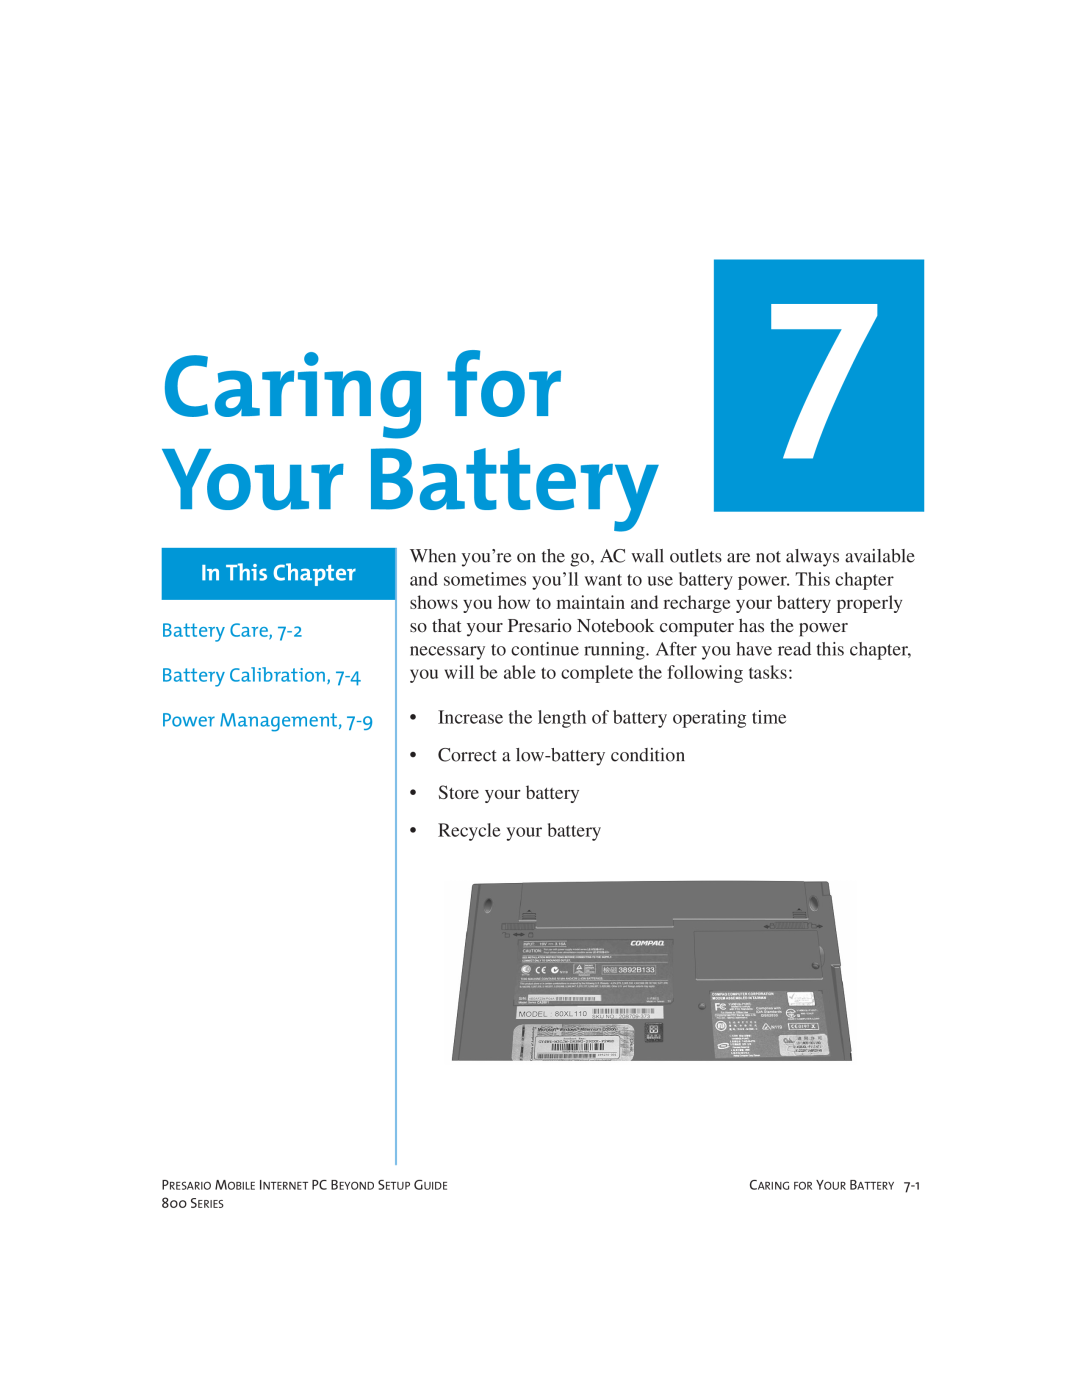 Compaq 800 manual Caring for Your Battery, In This Chapter, Battery Care, Battery Calibration, Power Management 